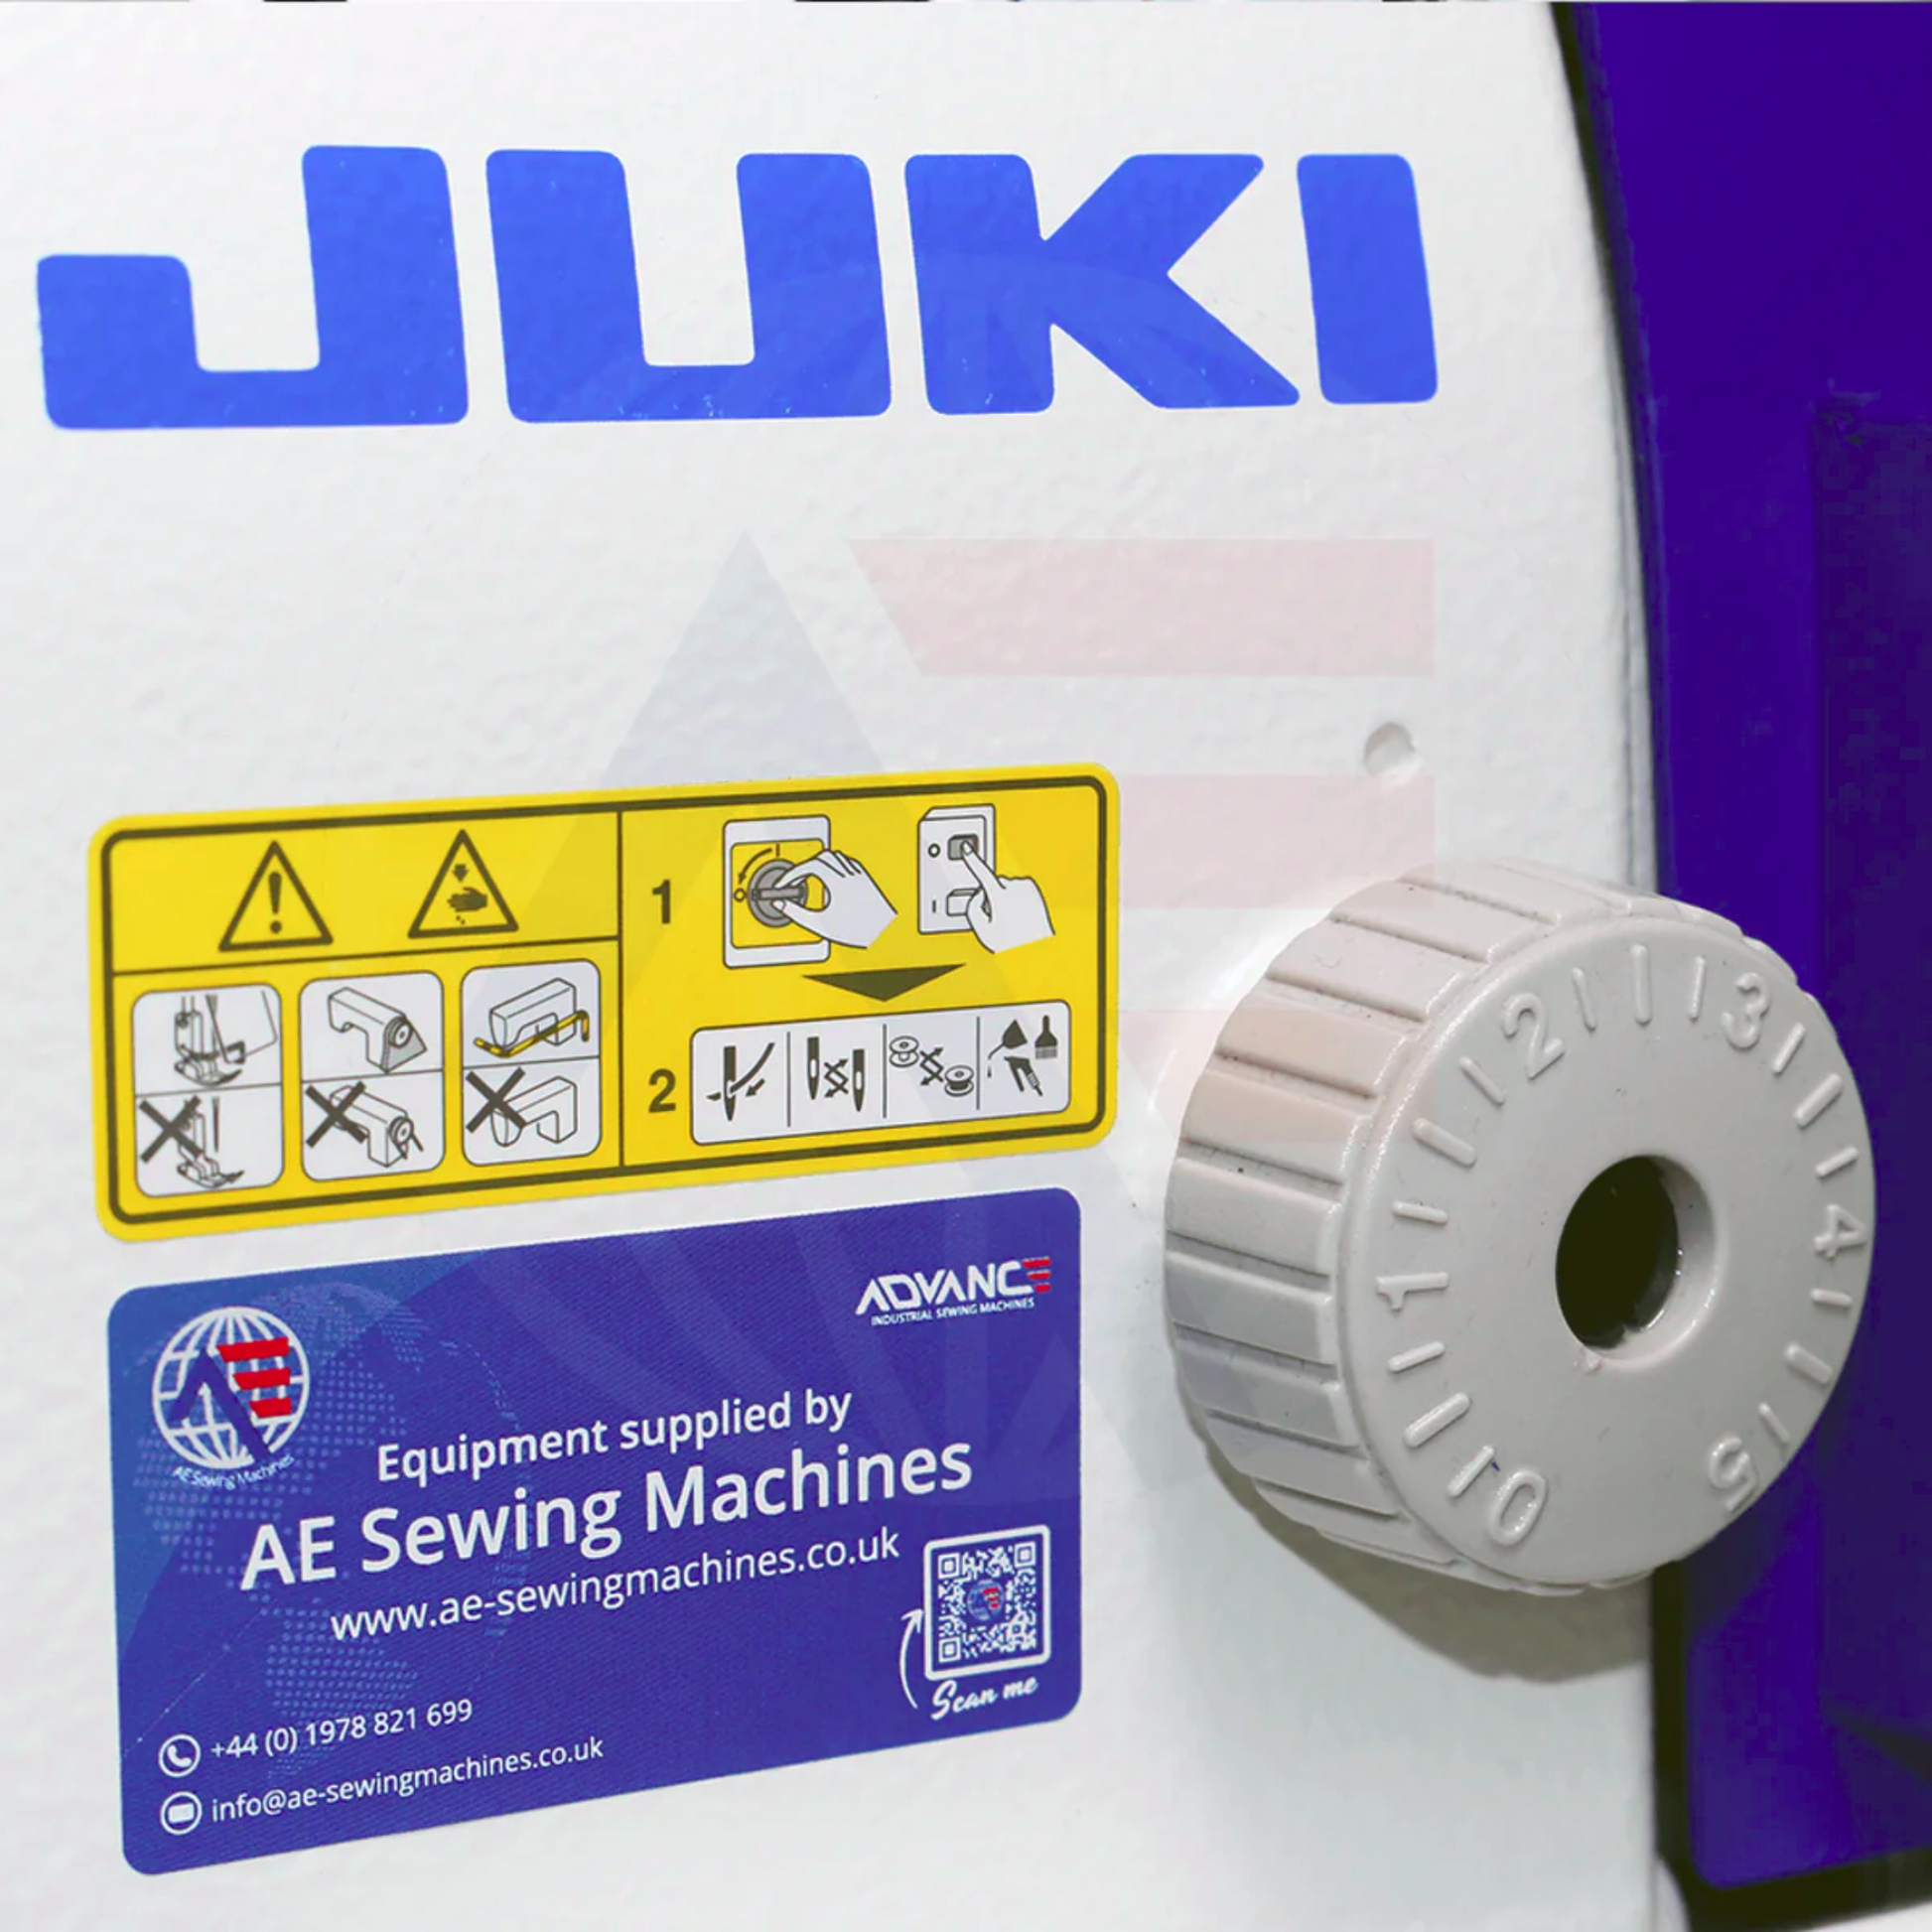 Juki DDL-7000A-7 1-needle, lockstitch machine with automatic functions - Sewing machine - Multi color - Close view